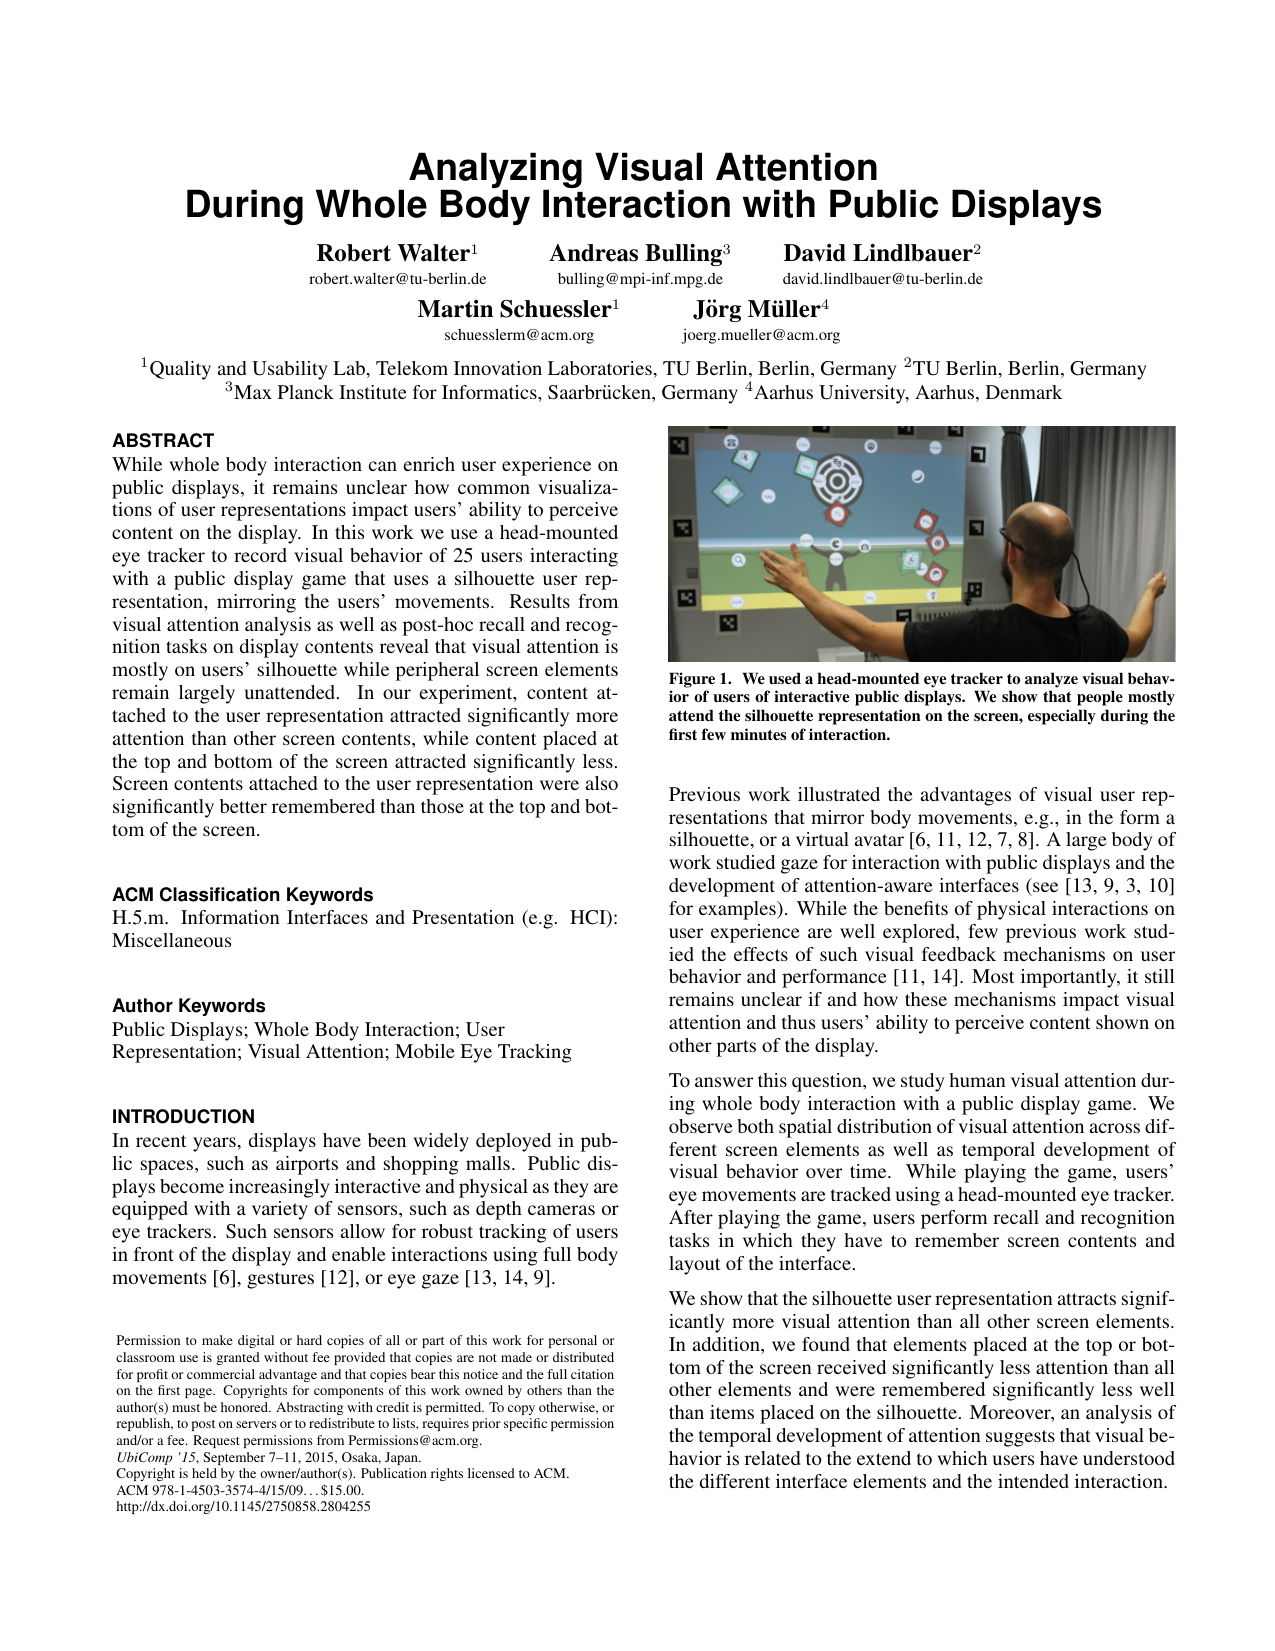 Analyzing Visual Attention During Whole Body Interaction with Public Displays